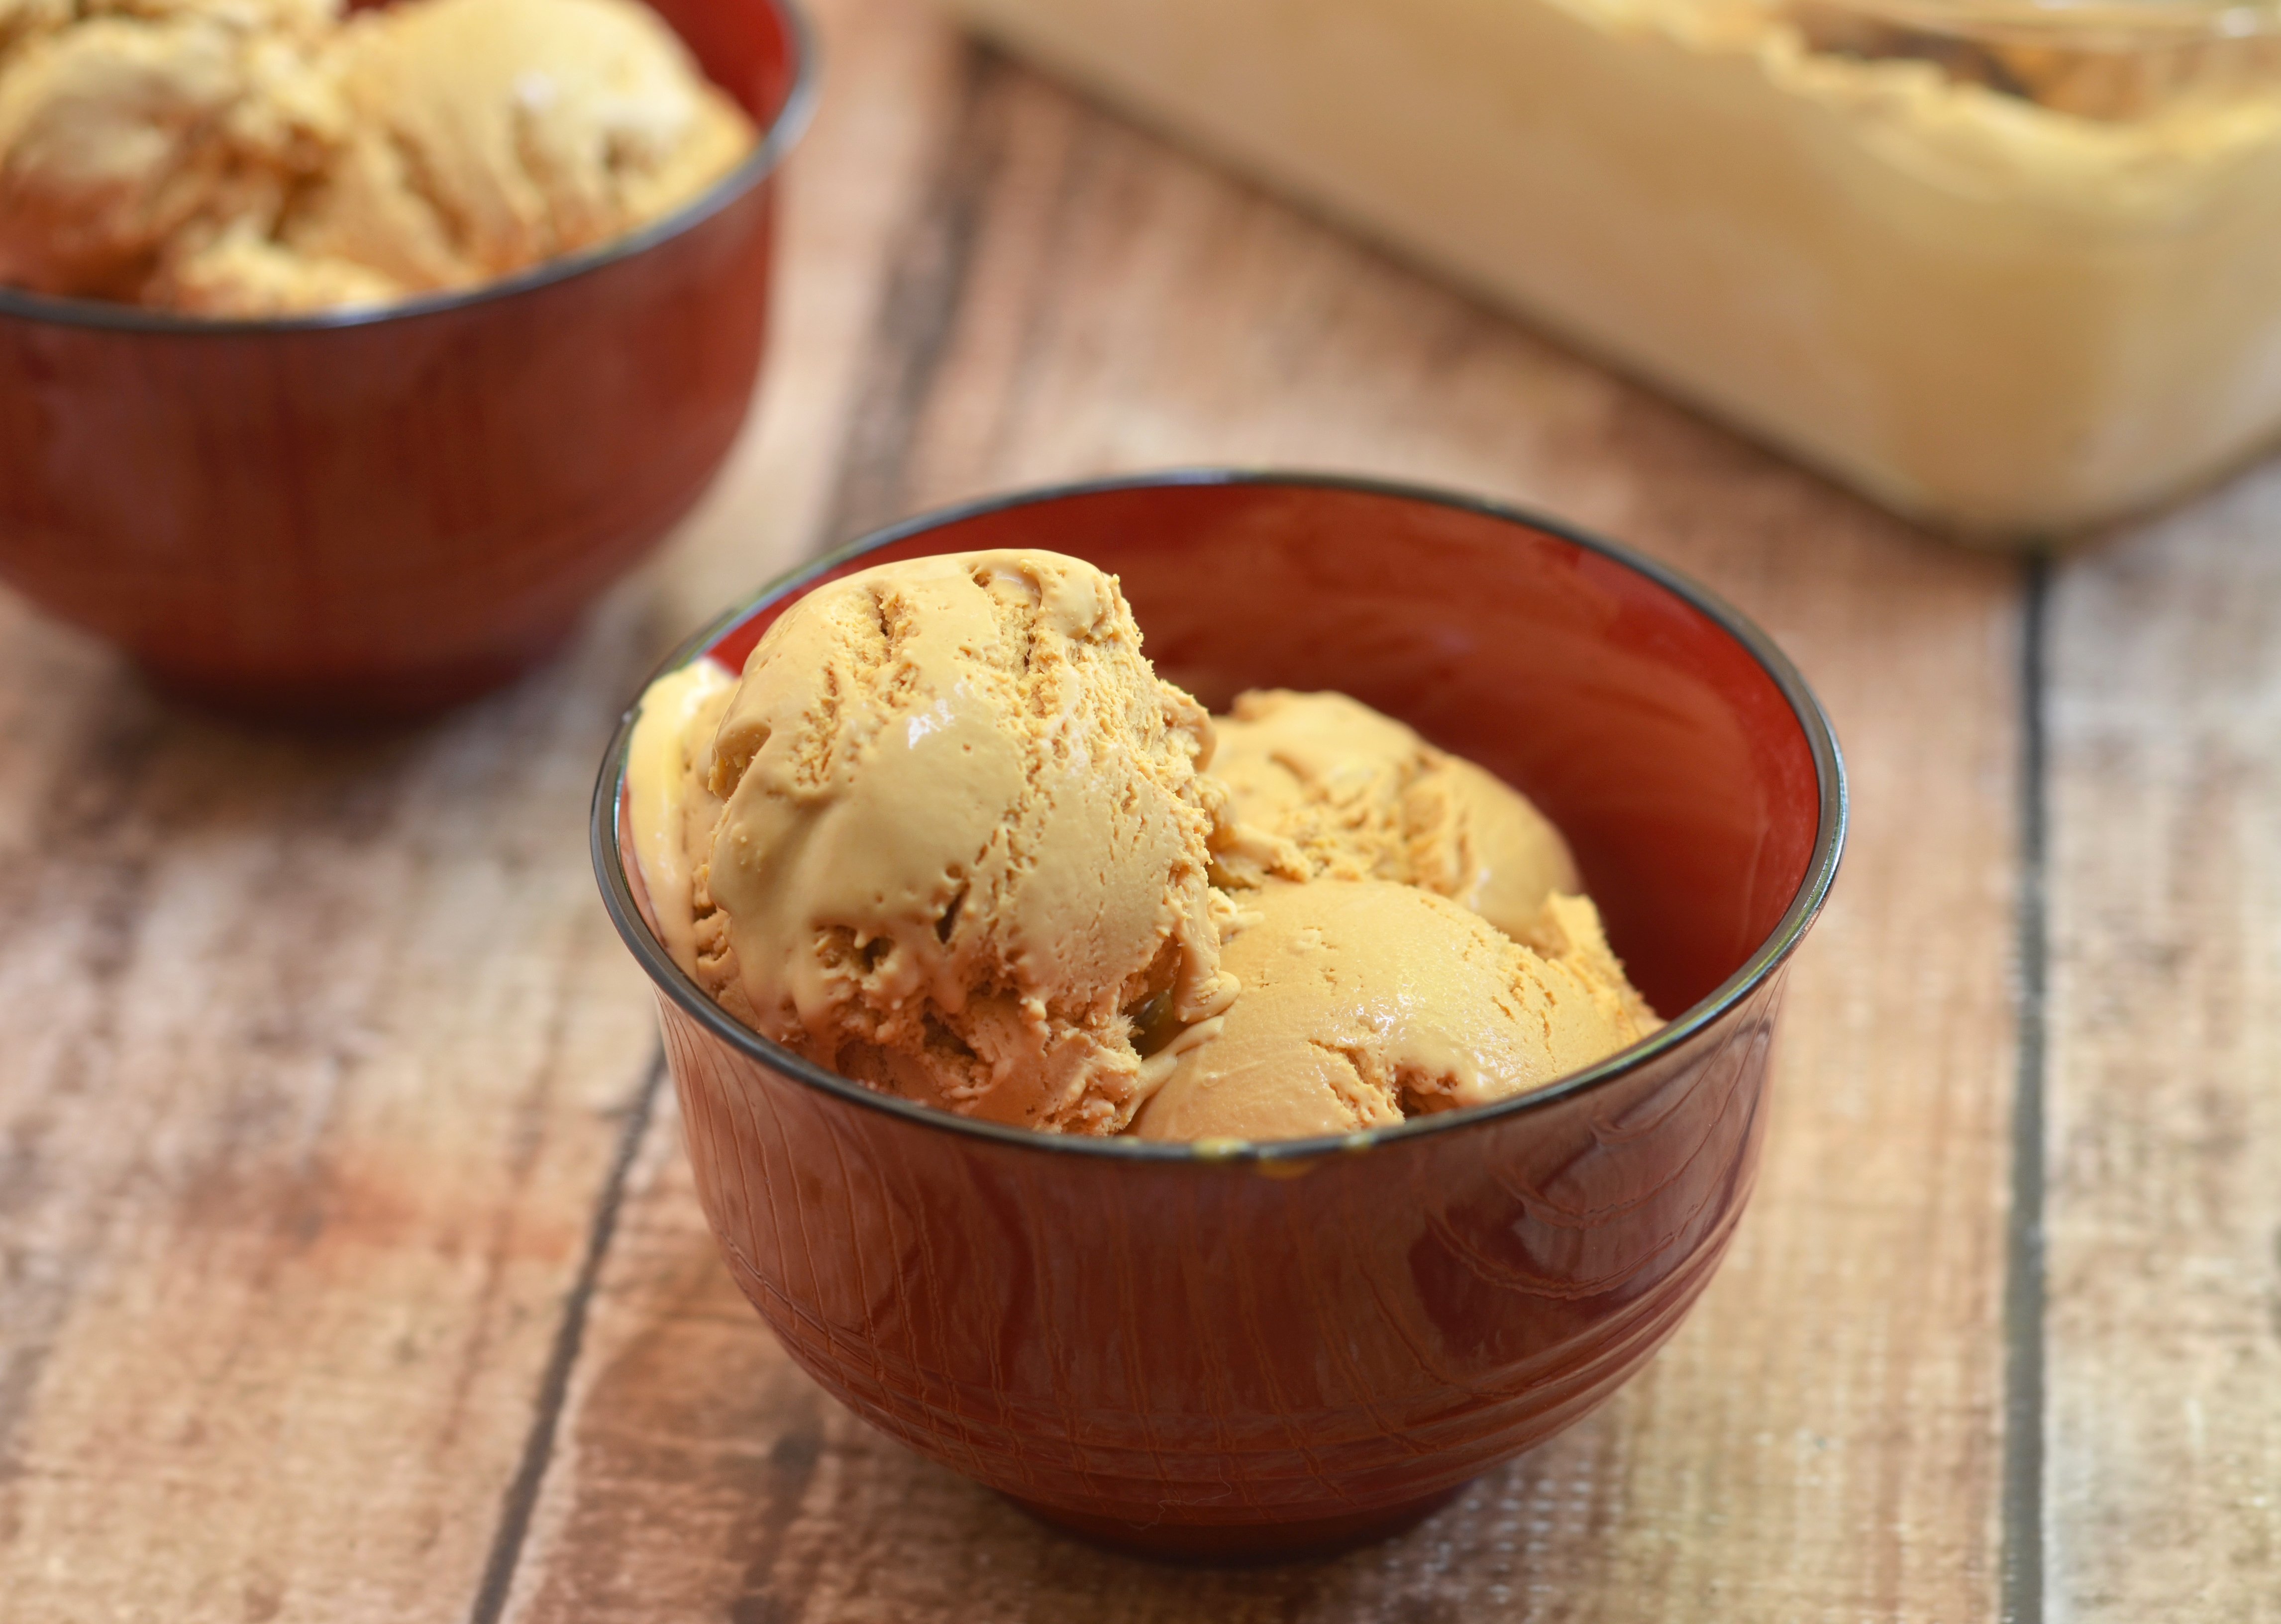 Serve up another bowl of this delicious two-ingredient homemade ice cream. 